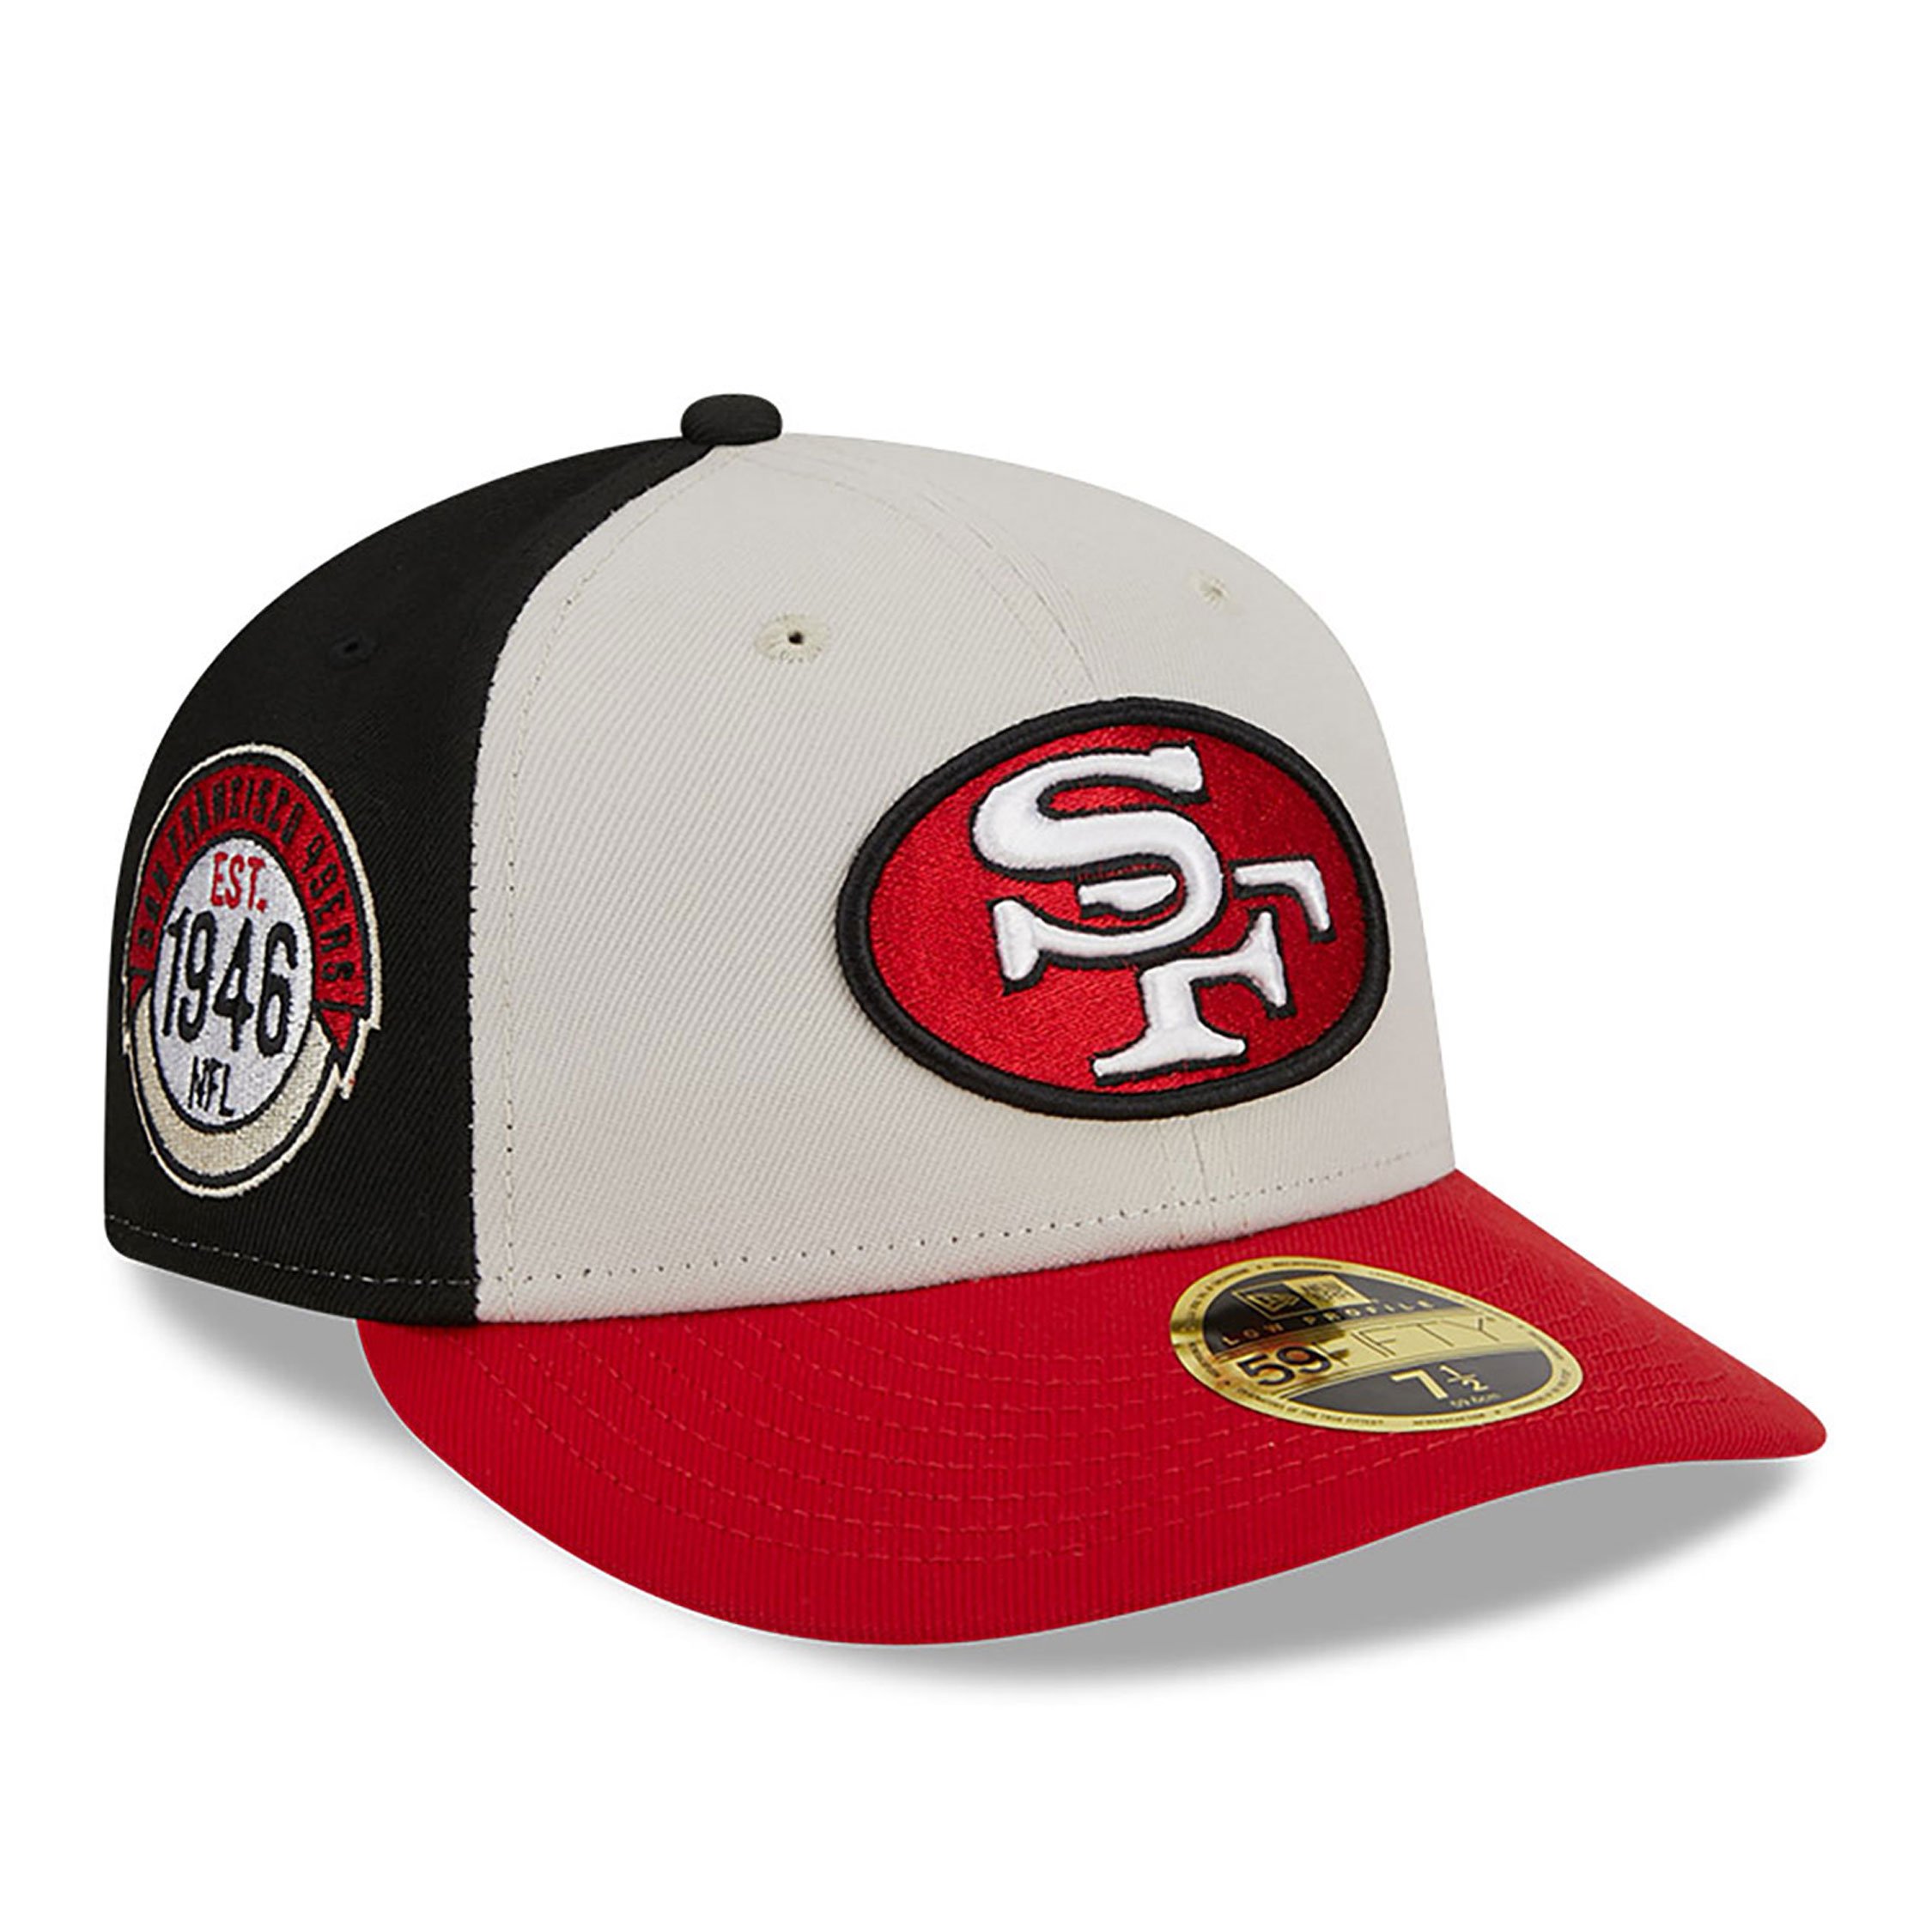 https://www.neweracap.eu/globalassets/products/d02_985/60407045/san-francisco-49ers-nlf-sideline-2023-red-59fifty-low-profile-cap-60407045-left.jpg